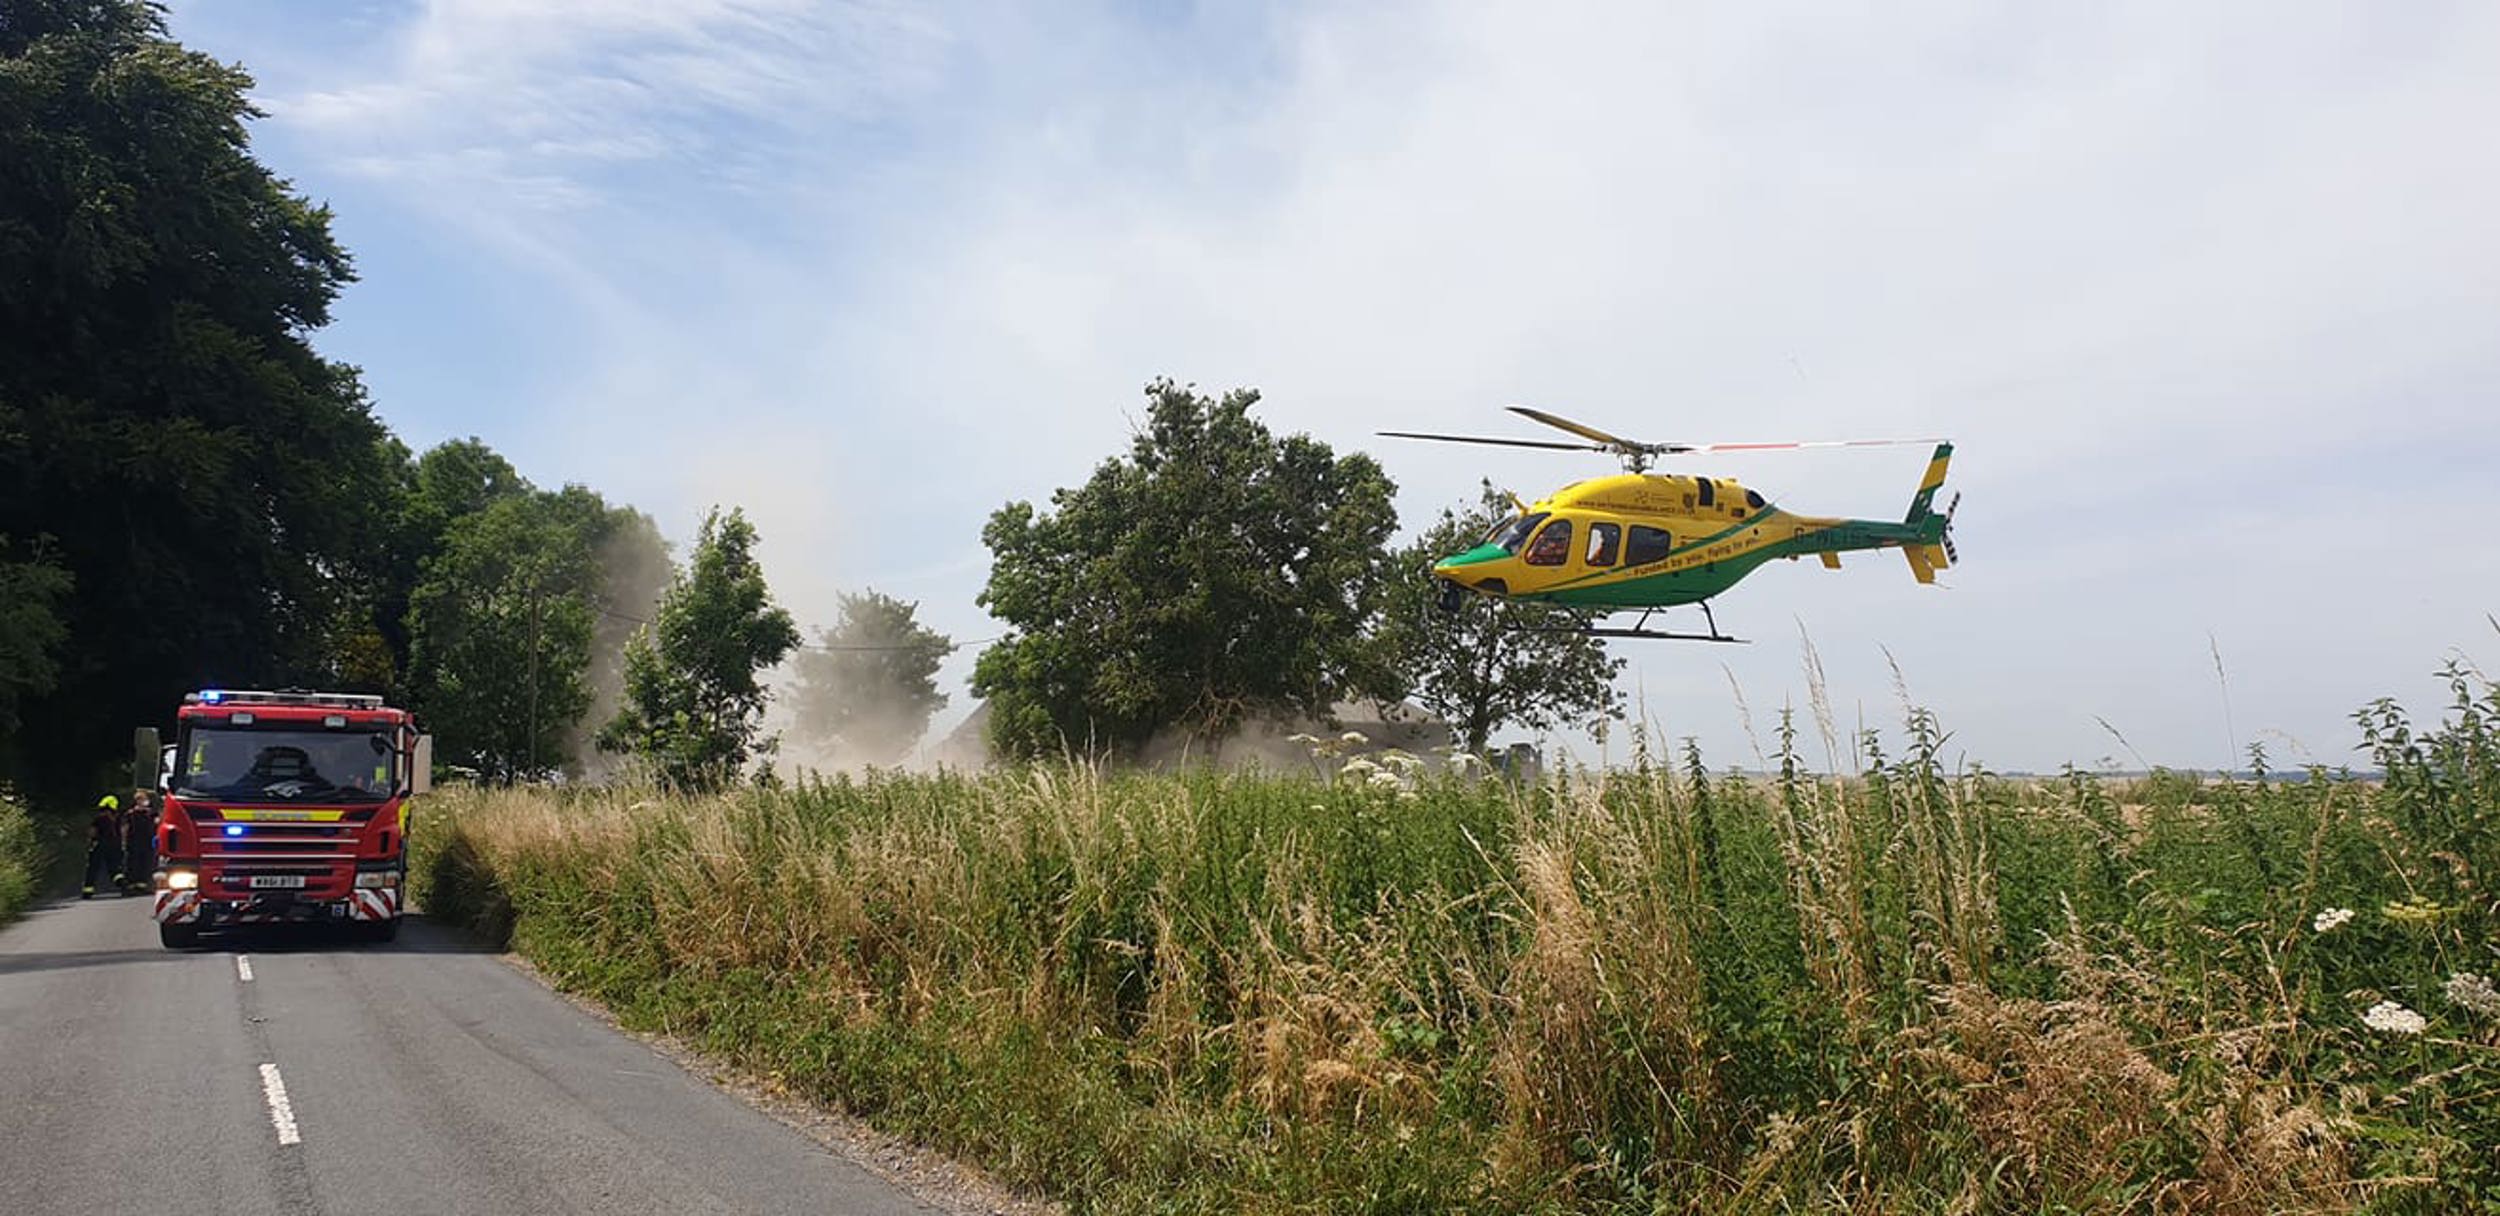 Wiltshire Air Ambulance taking off next to a fire engine in Mere